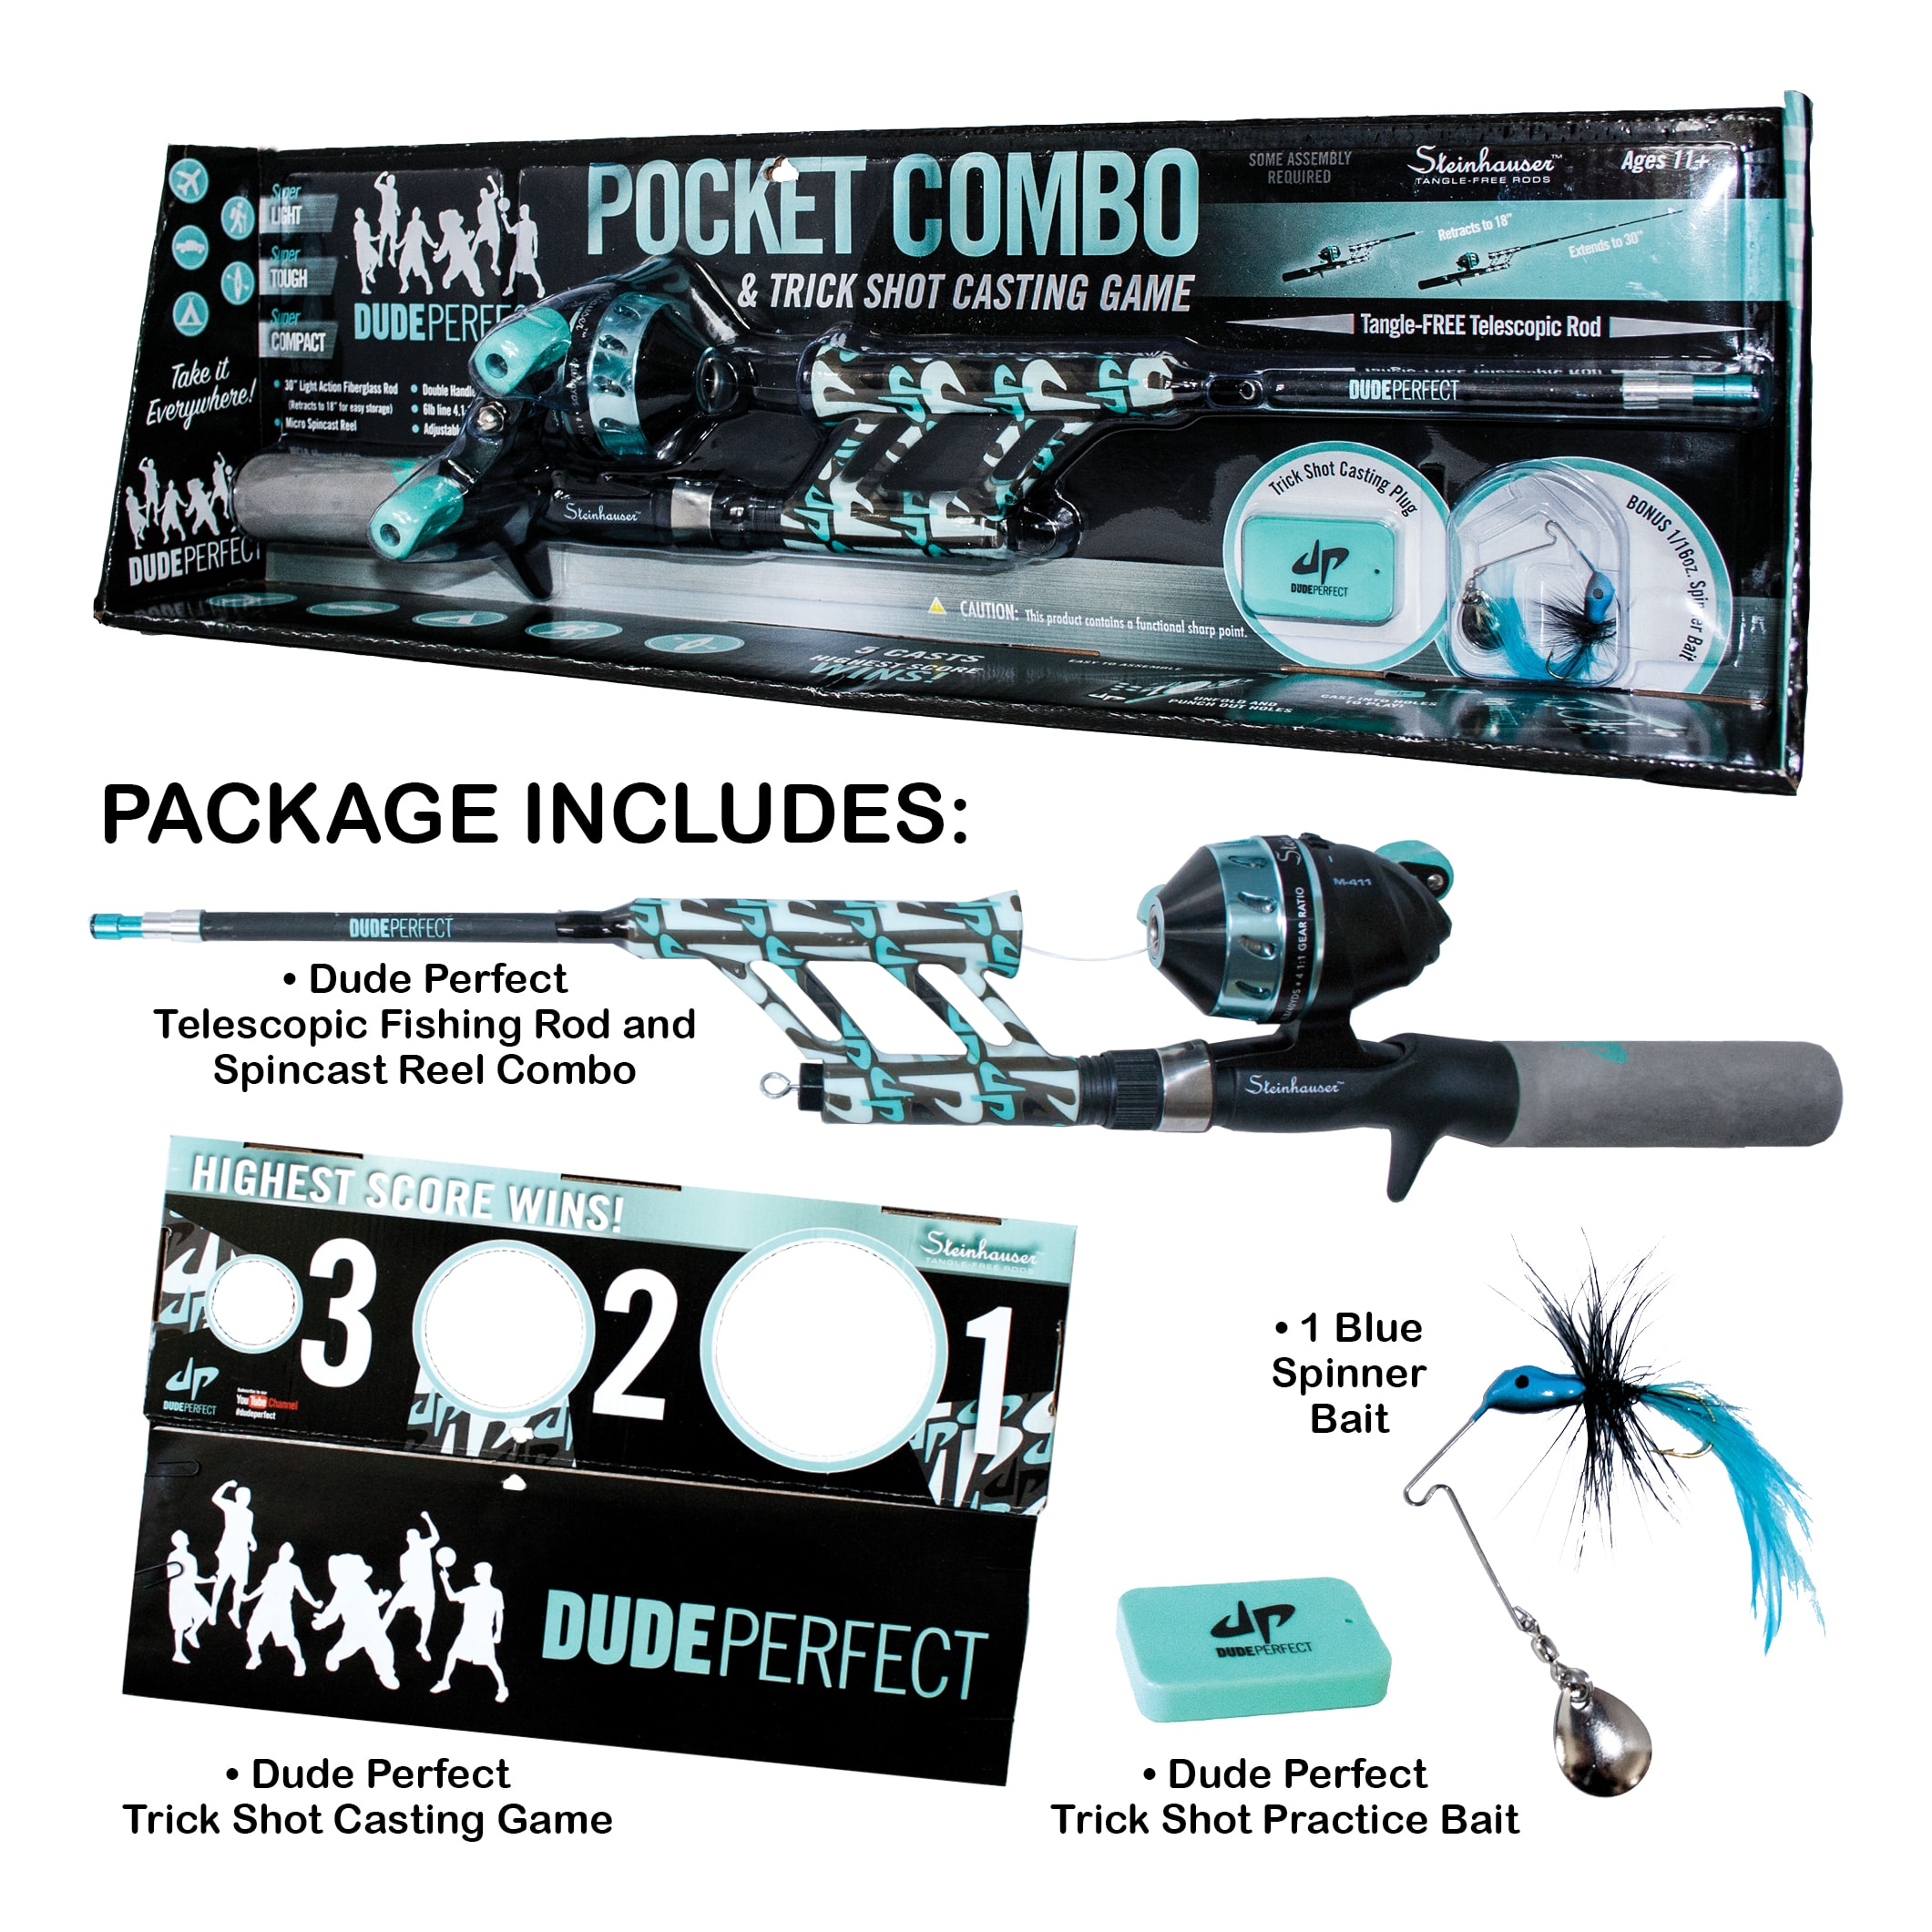 Kid Casters Dude Perfect Pocket Combo & Trick Shot Game - Package Includes View